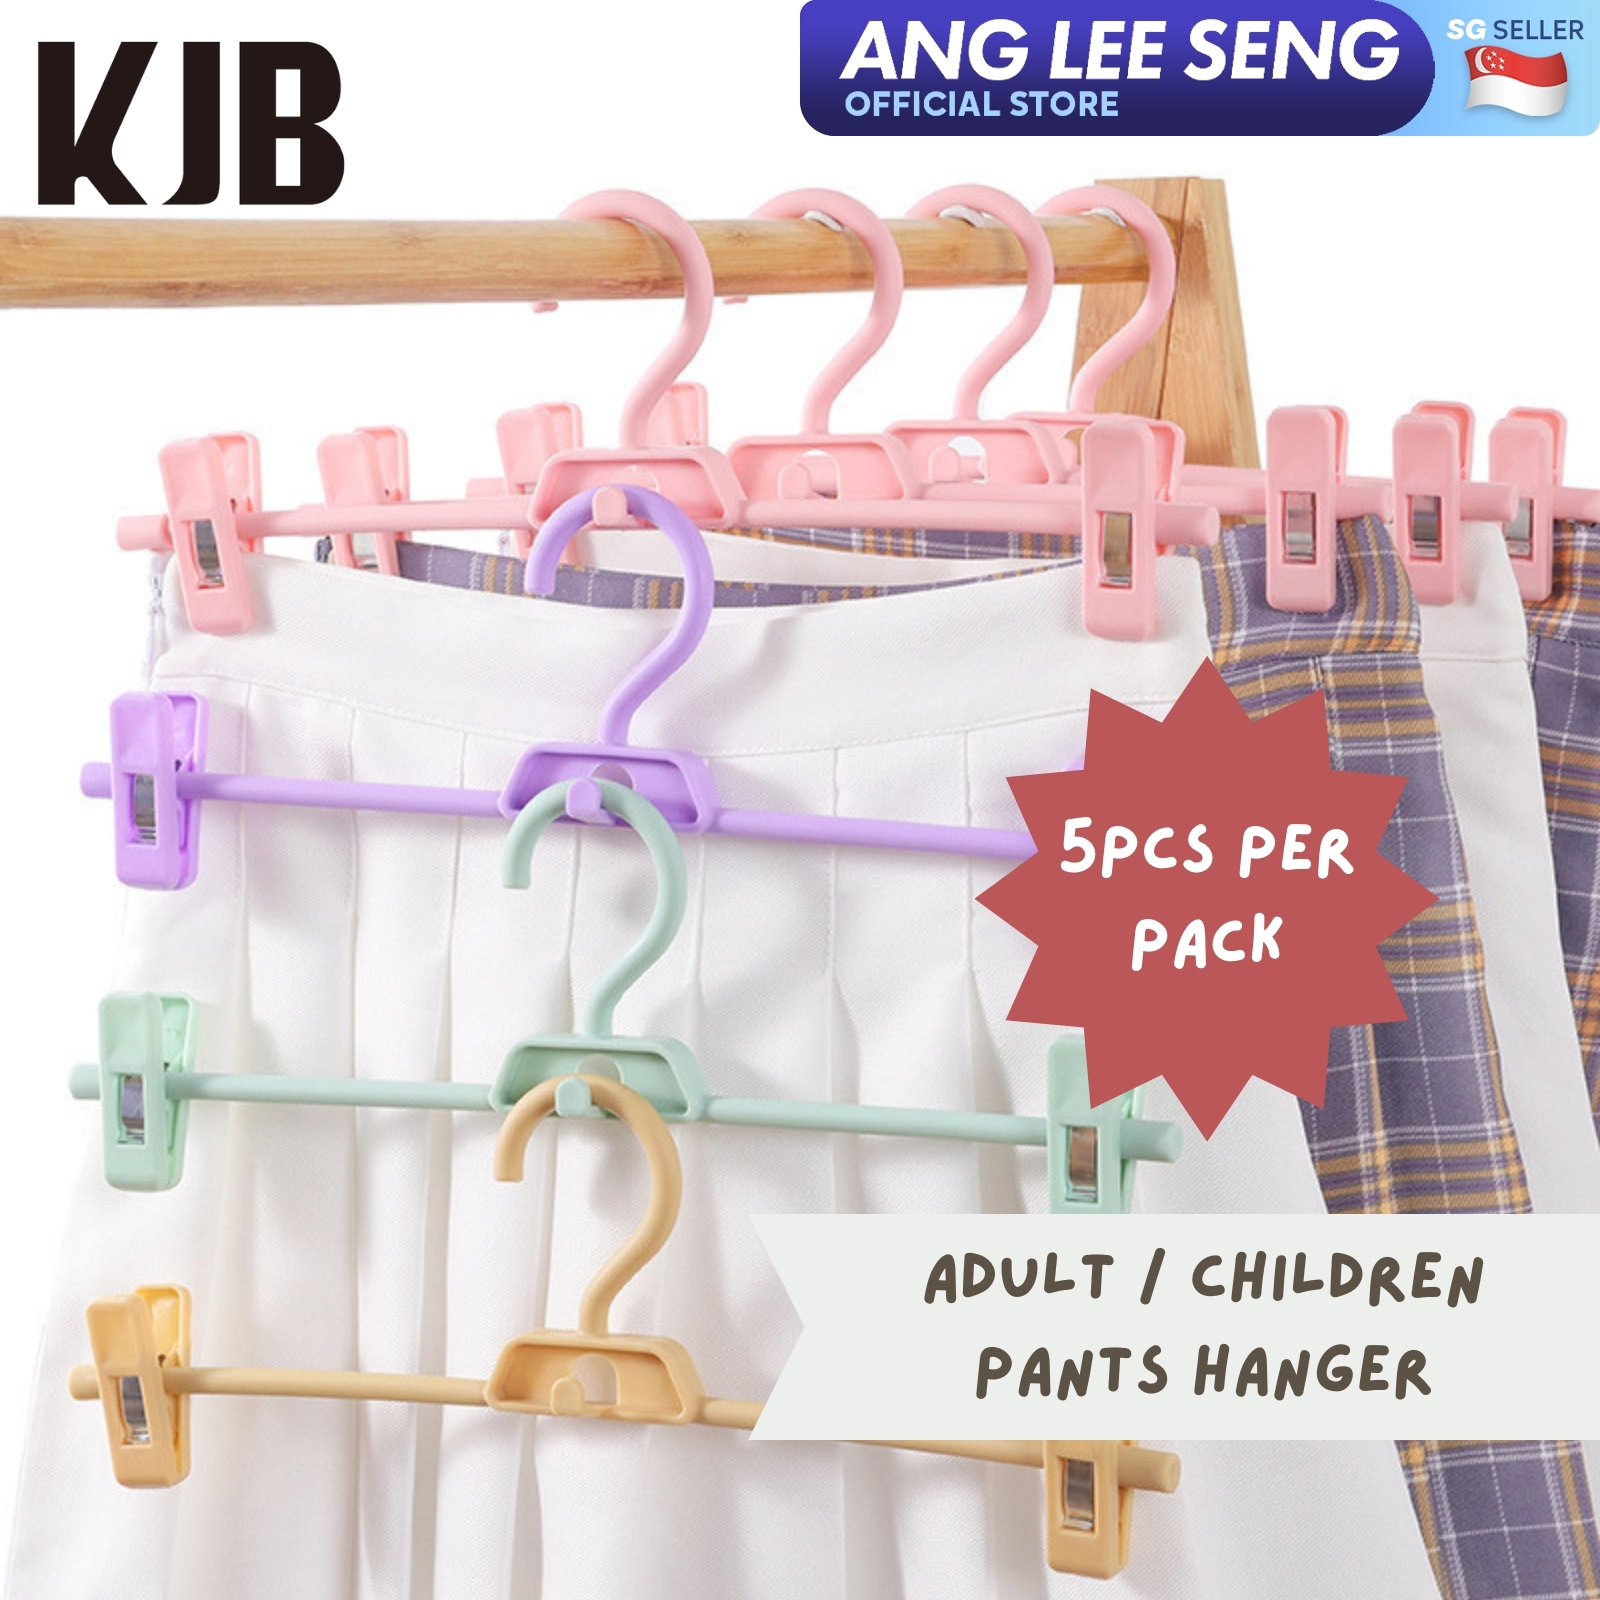 KJB Geshang Pants Hanger with Clips 5pcs Pack - 5 Colours